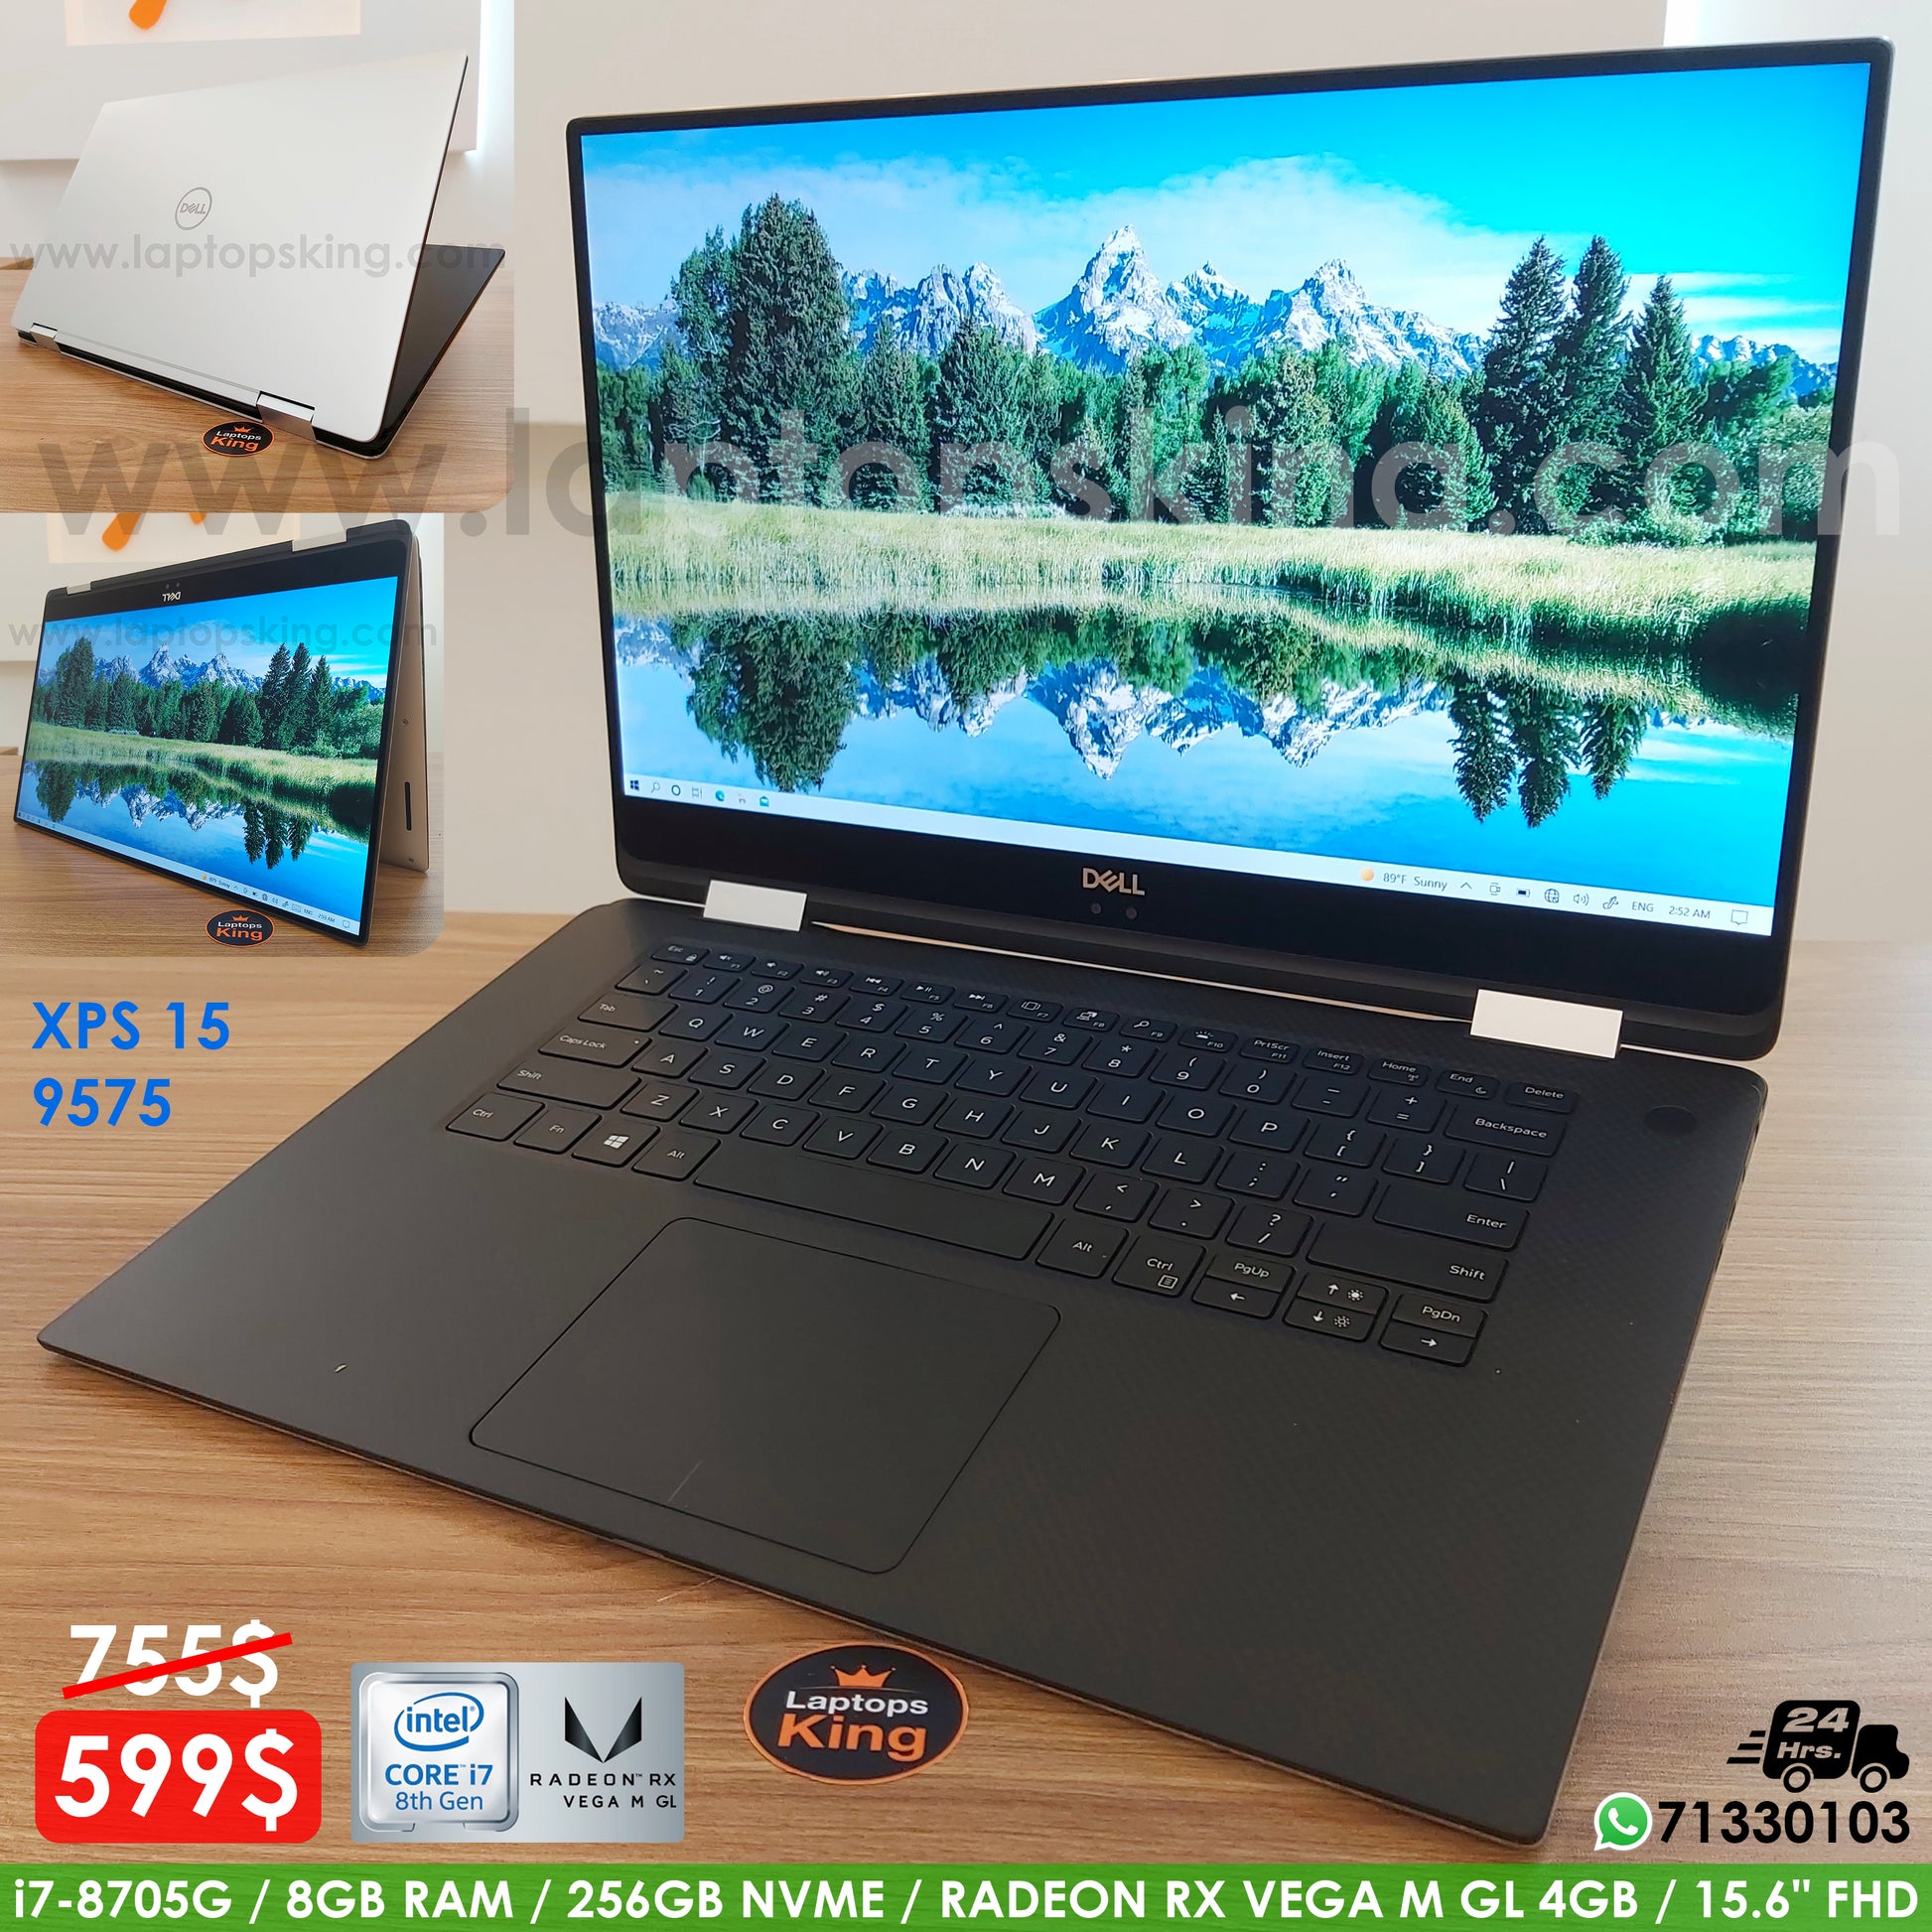 Dell XPS 15 9575 2in1 15.6" i7-8705G RX Vega 4gb Laptop (Used Very Clean) Computer for sale Lebanon, laptop in Lebanon, laptop for sale Lebanon, best programming laptop, laptop for sale in Lebanon, laptops for sale in Lebanon, laptop for sale in Lebanon, buy computer Lebanon, buy laptop Lebanon.